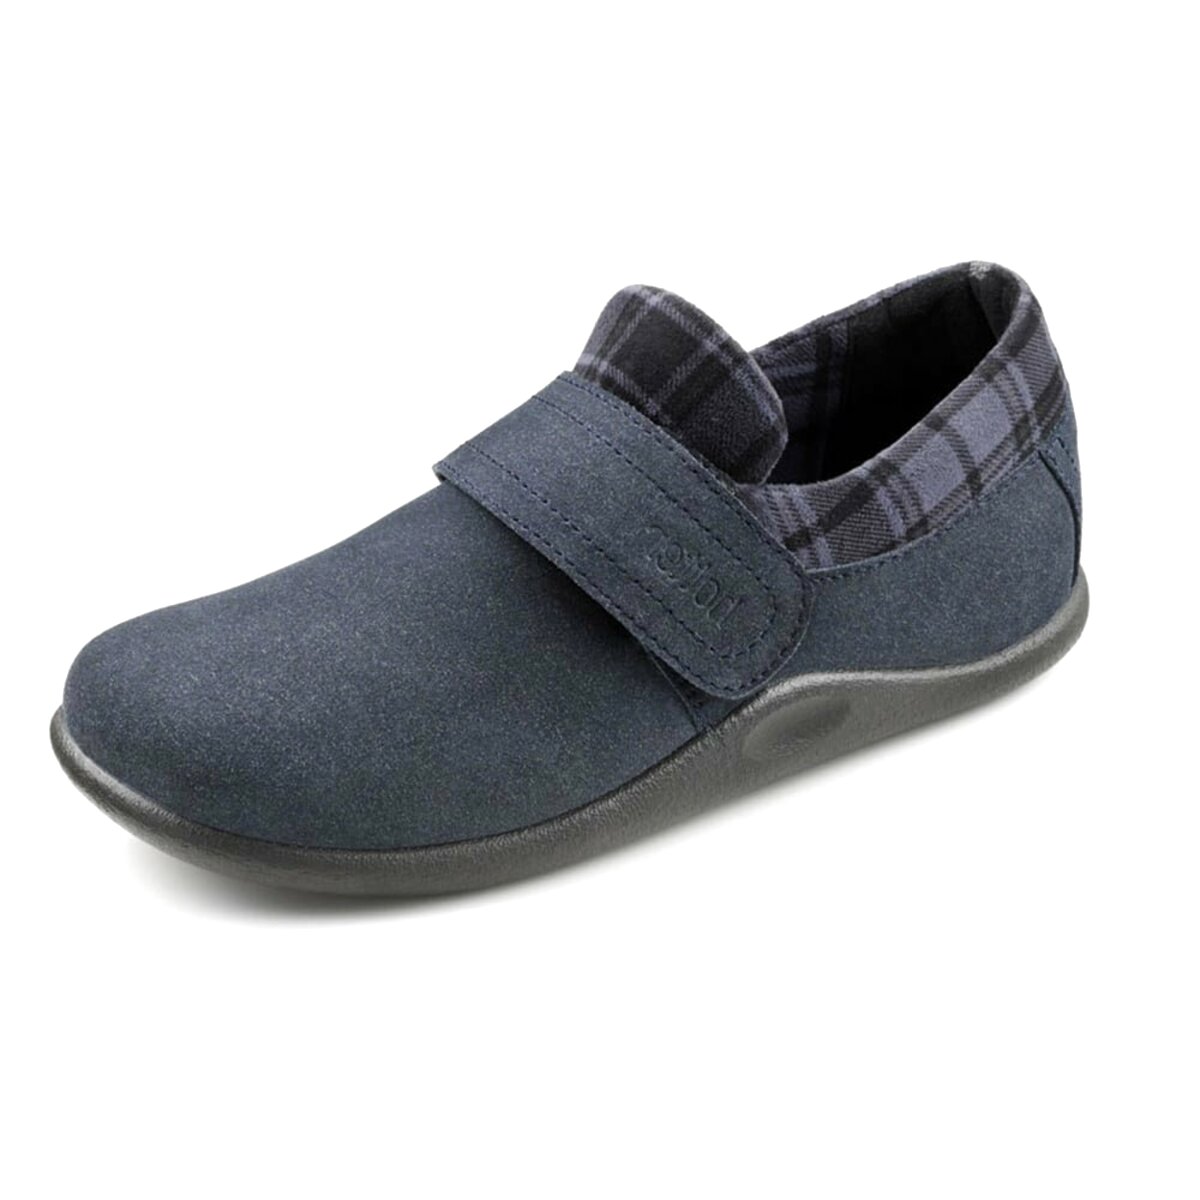 hotter mens slippers amazon